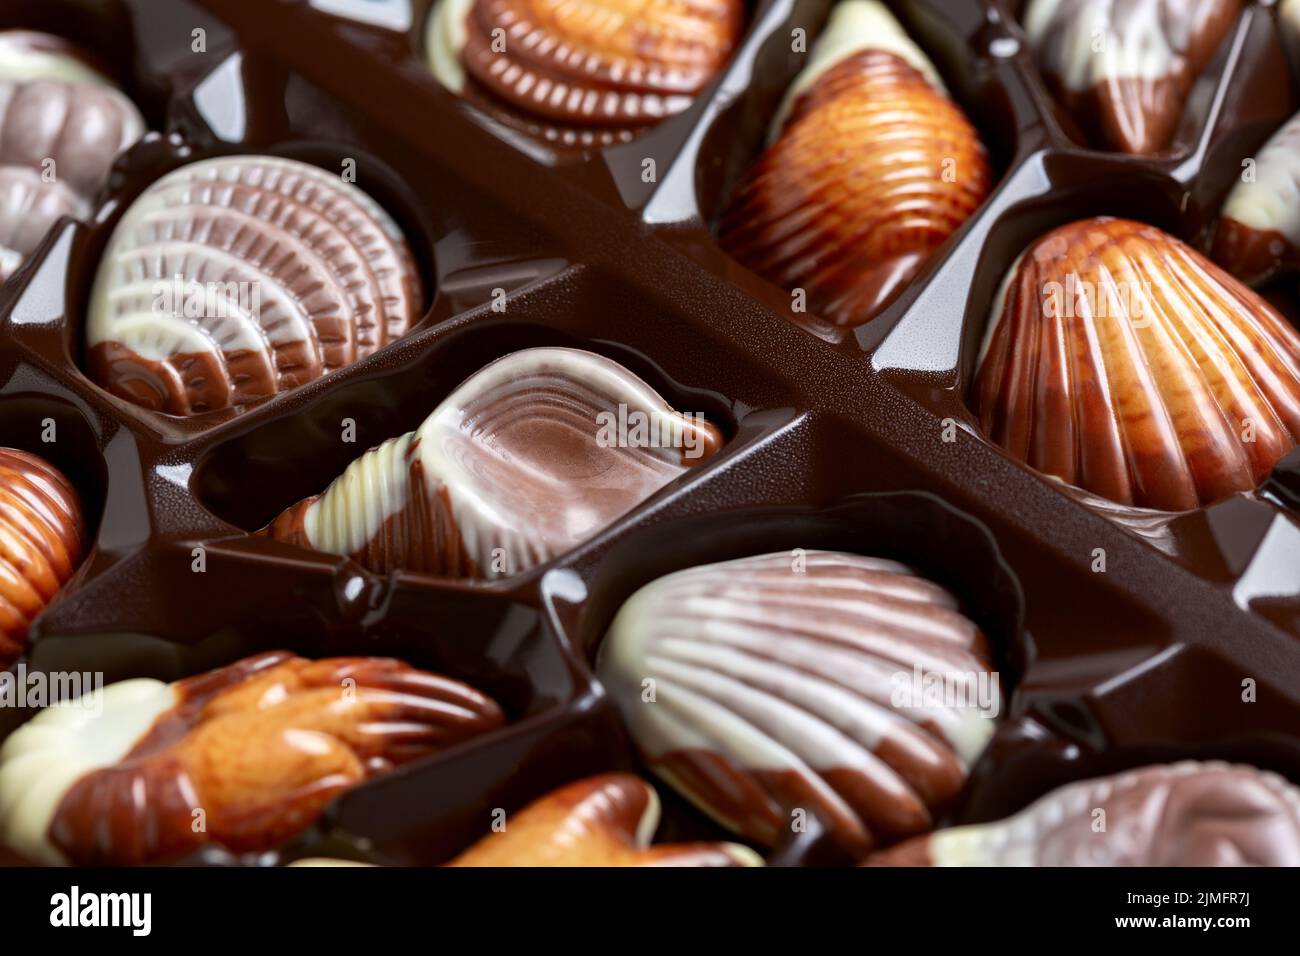 Sweets made of milk chocolate in a nautical style. Stock Photo